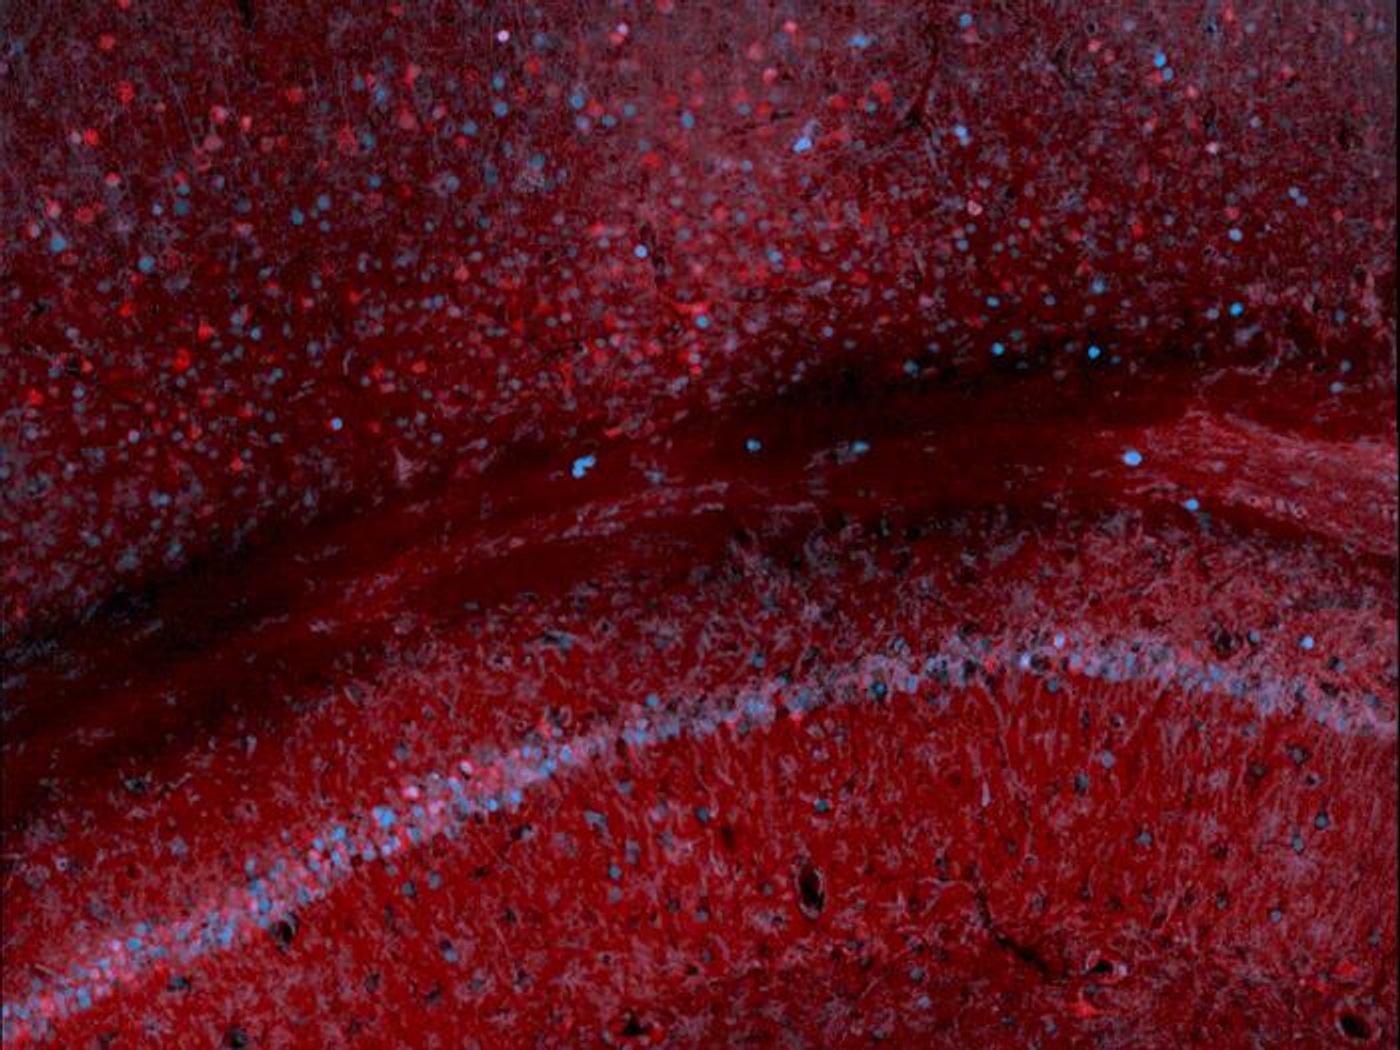 Scan of mouse hippocampus and cortex: immunostaining for the synthetic marker developed by the Szablowski lab (red) and c-Fos (blue) a natural protein which is a marker of increased neuronal activity. / Credit: Image courtesy of the Szablowski lab/Rice University